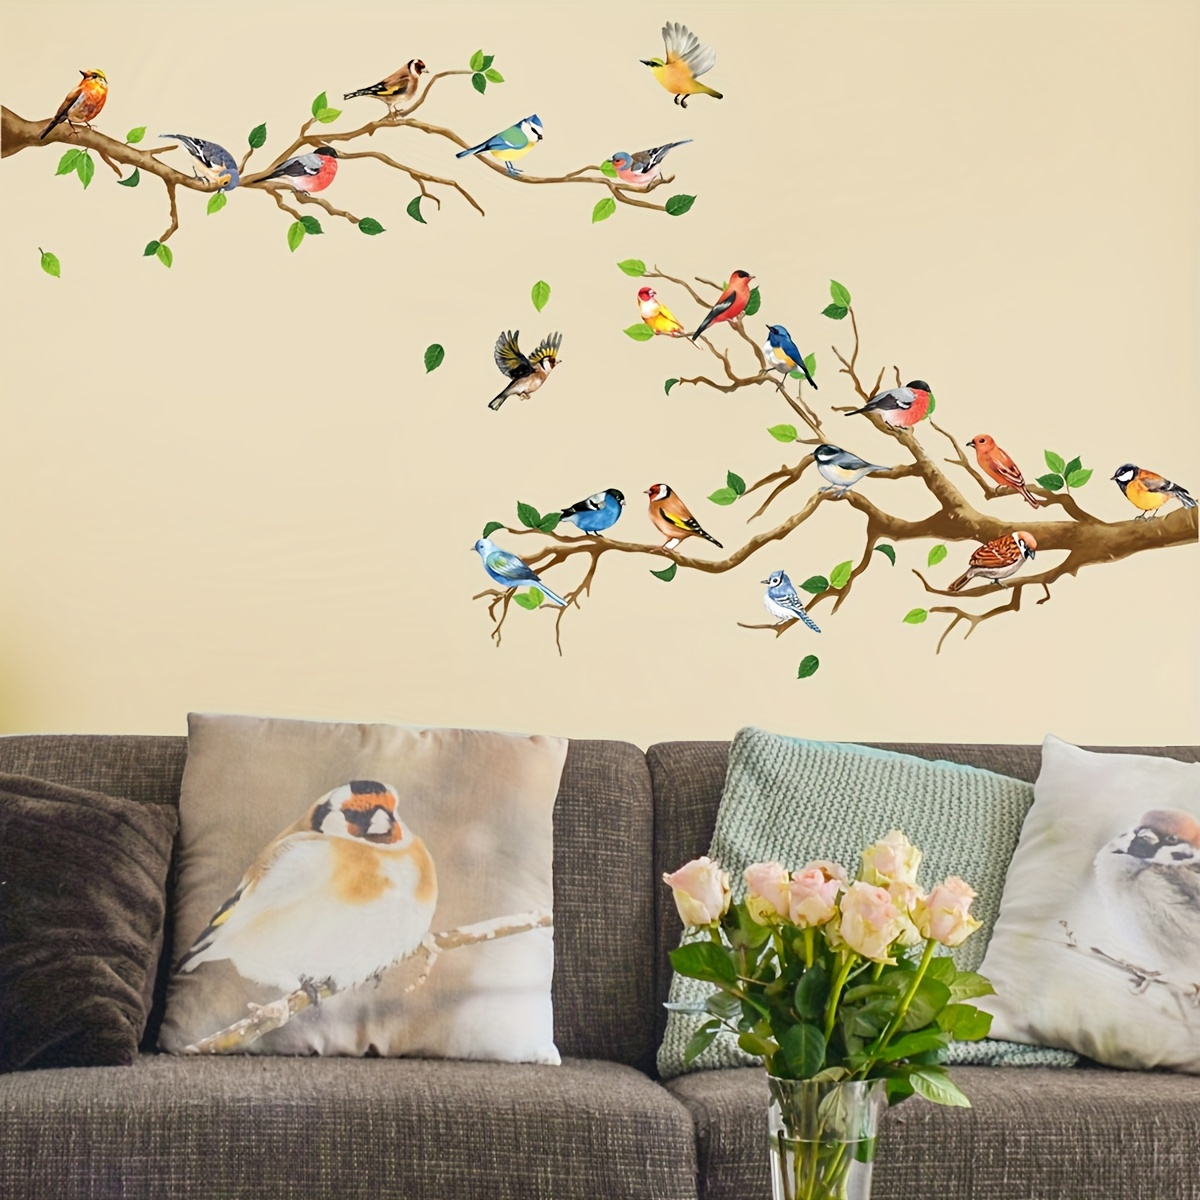 

4pcs Artistic Pvc Wall Decal, Colorful Birds On Branch Mural, Self-adhesive Removable Wall Art Sticker For Bedroom, Entryway, Living Room, Office, Porch, Background Wall Decor, Home Decoration